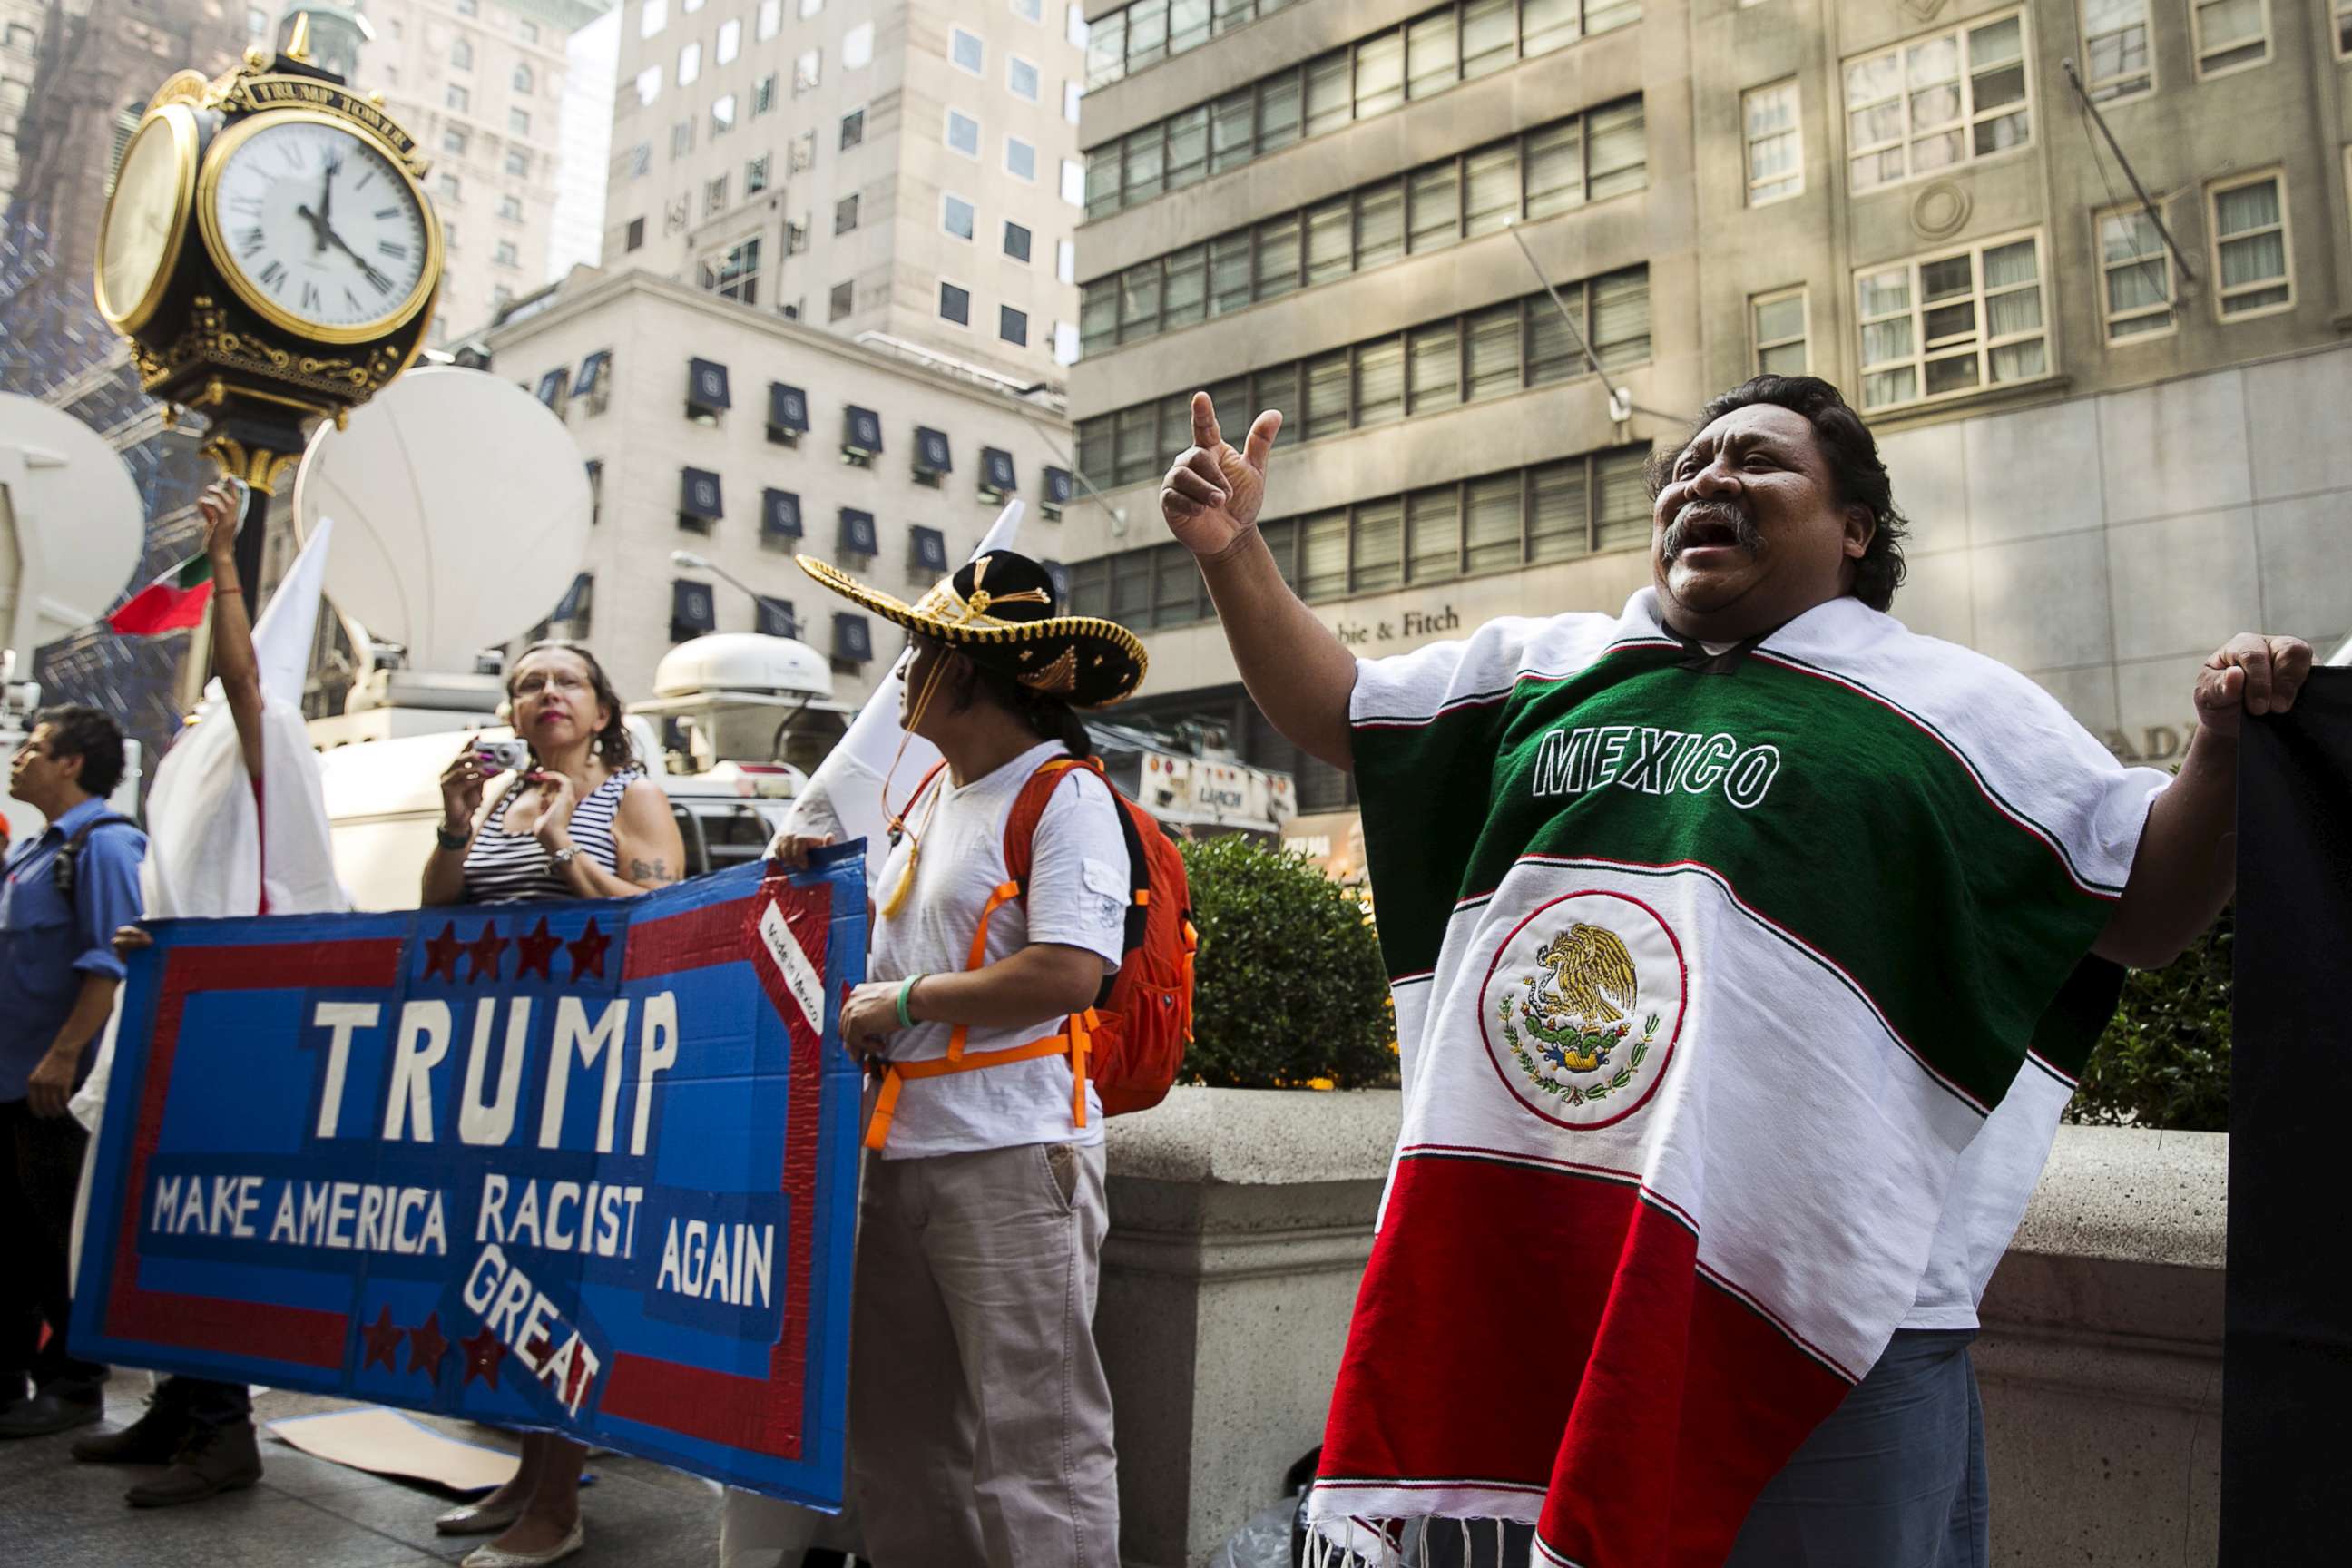 PHOTO: In this Sept. 3, 2015, file photo, demonstrators stand outside of Trump Tower in New York to protest Donald Trump's candidacy for U.S. President.